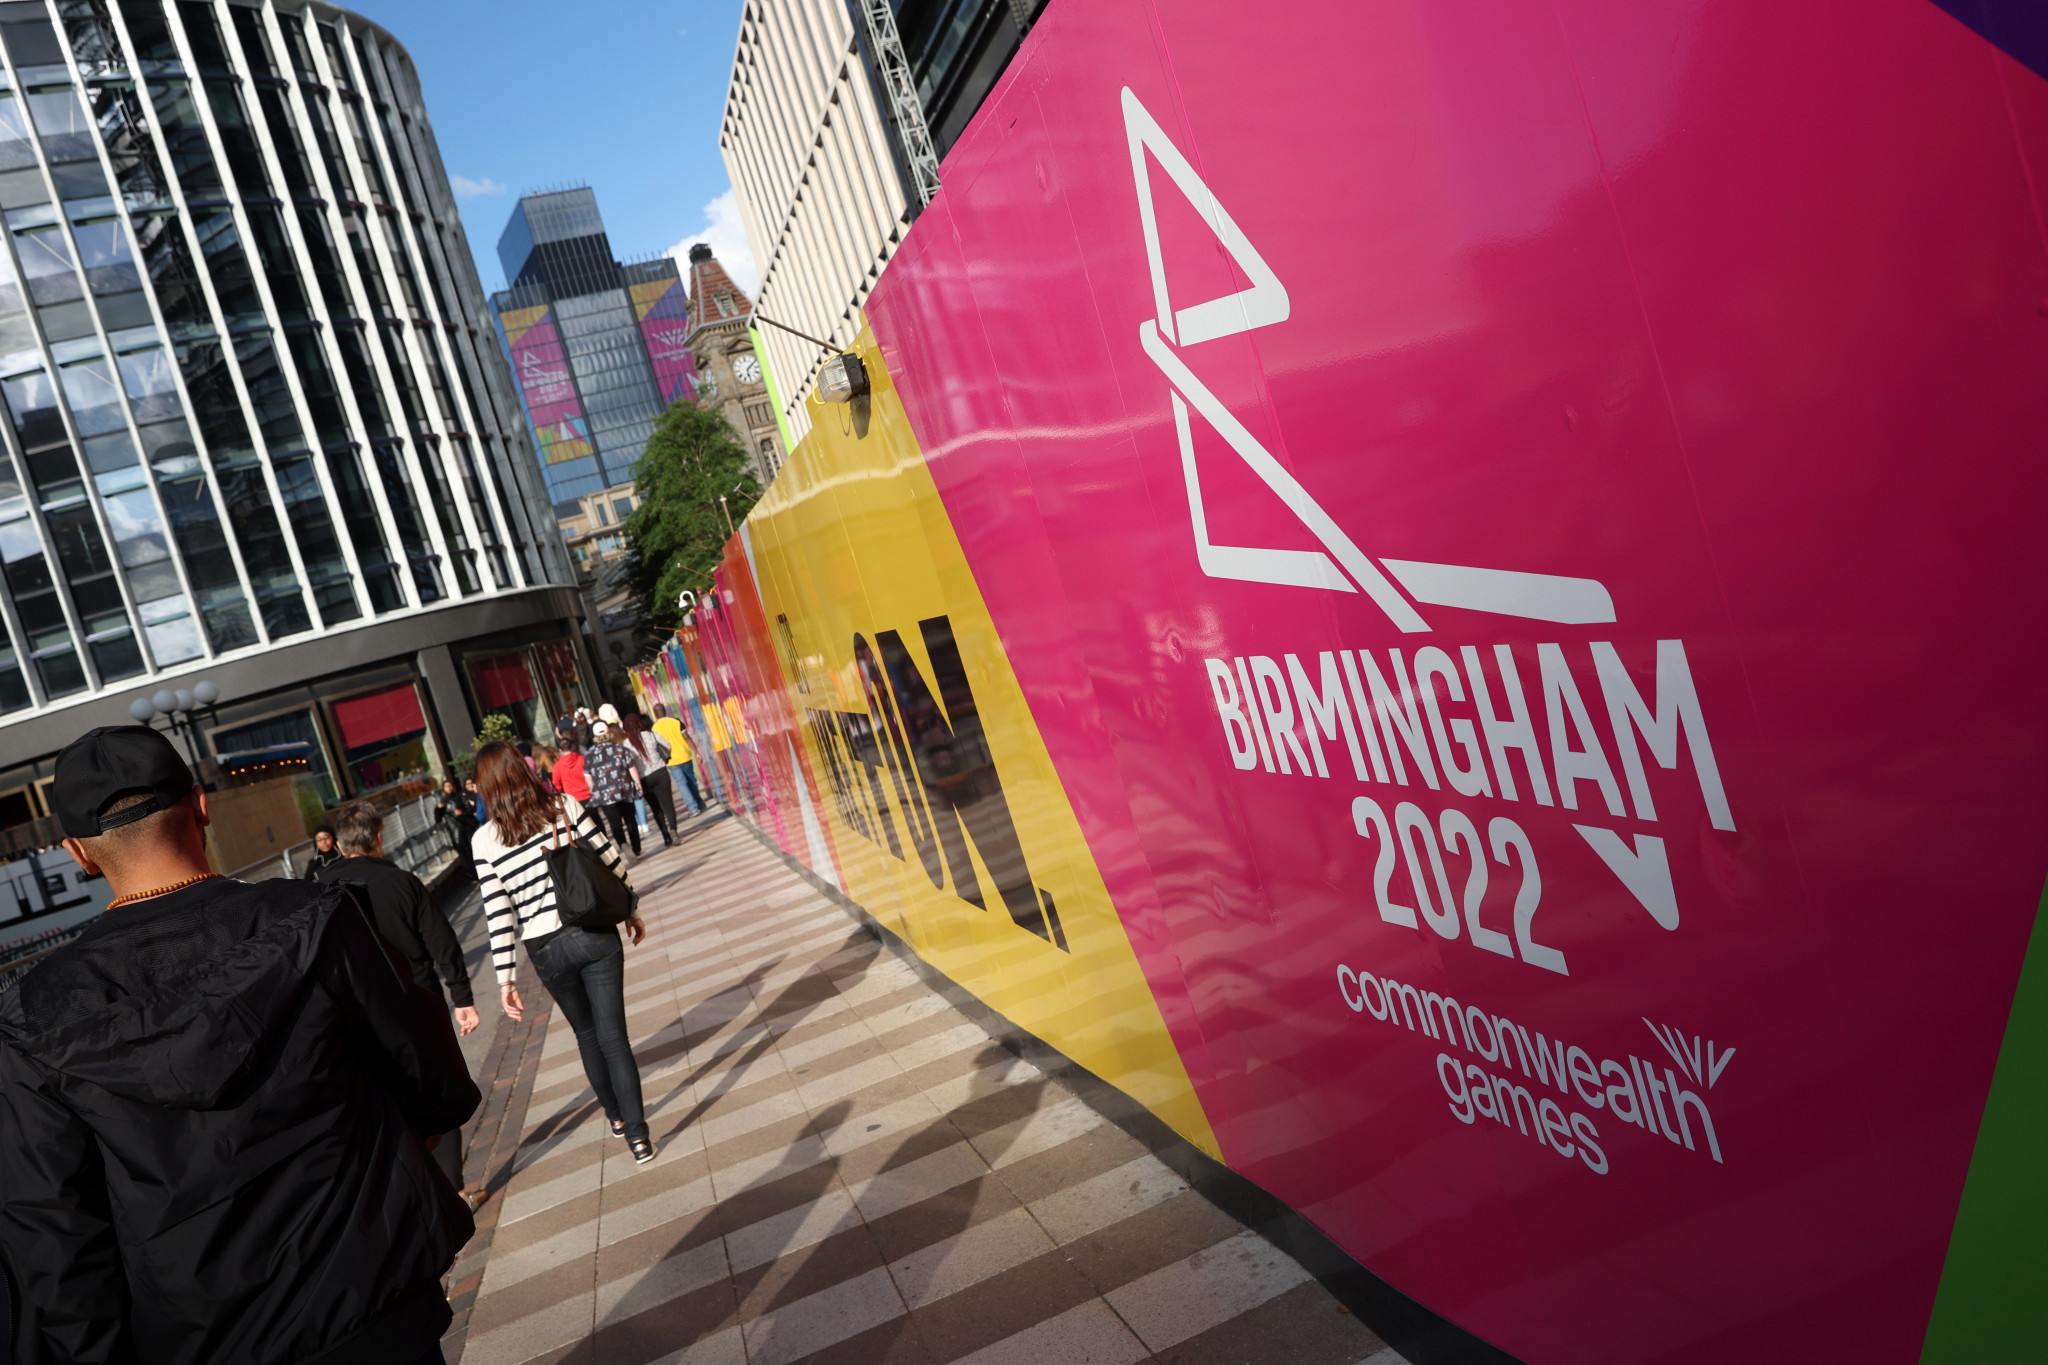 UK Government lauds success of Birmingham 2022 Business and Tourism Programme